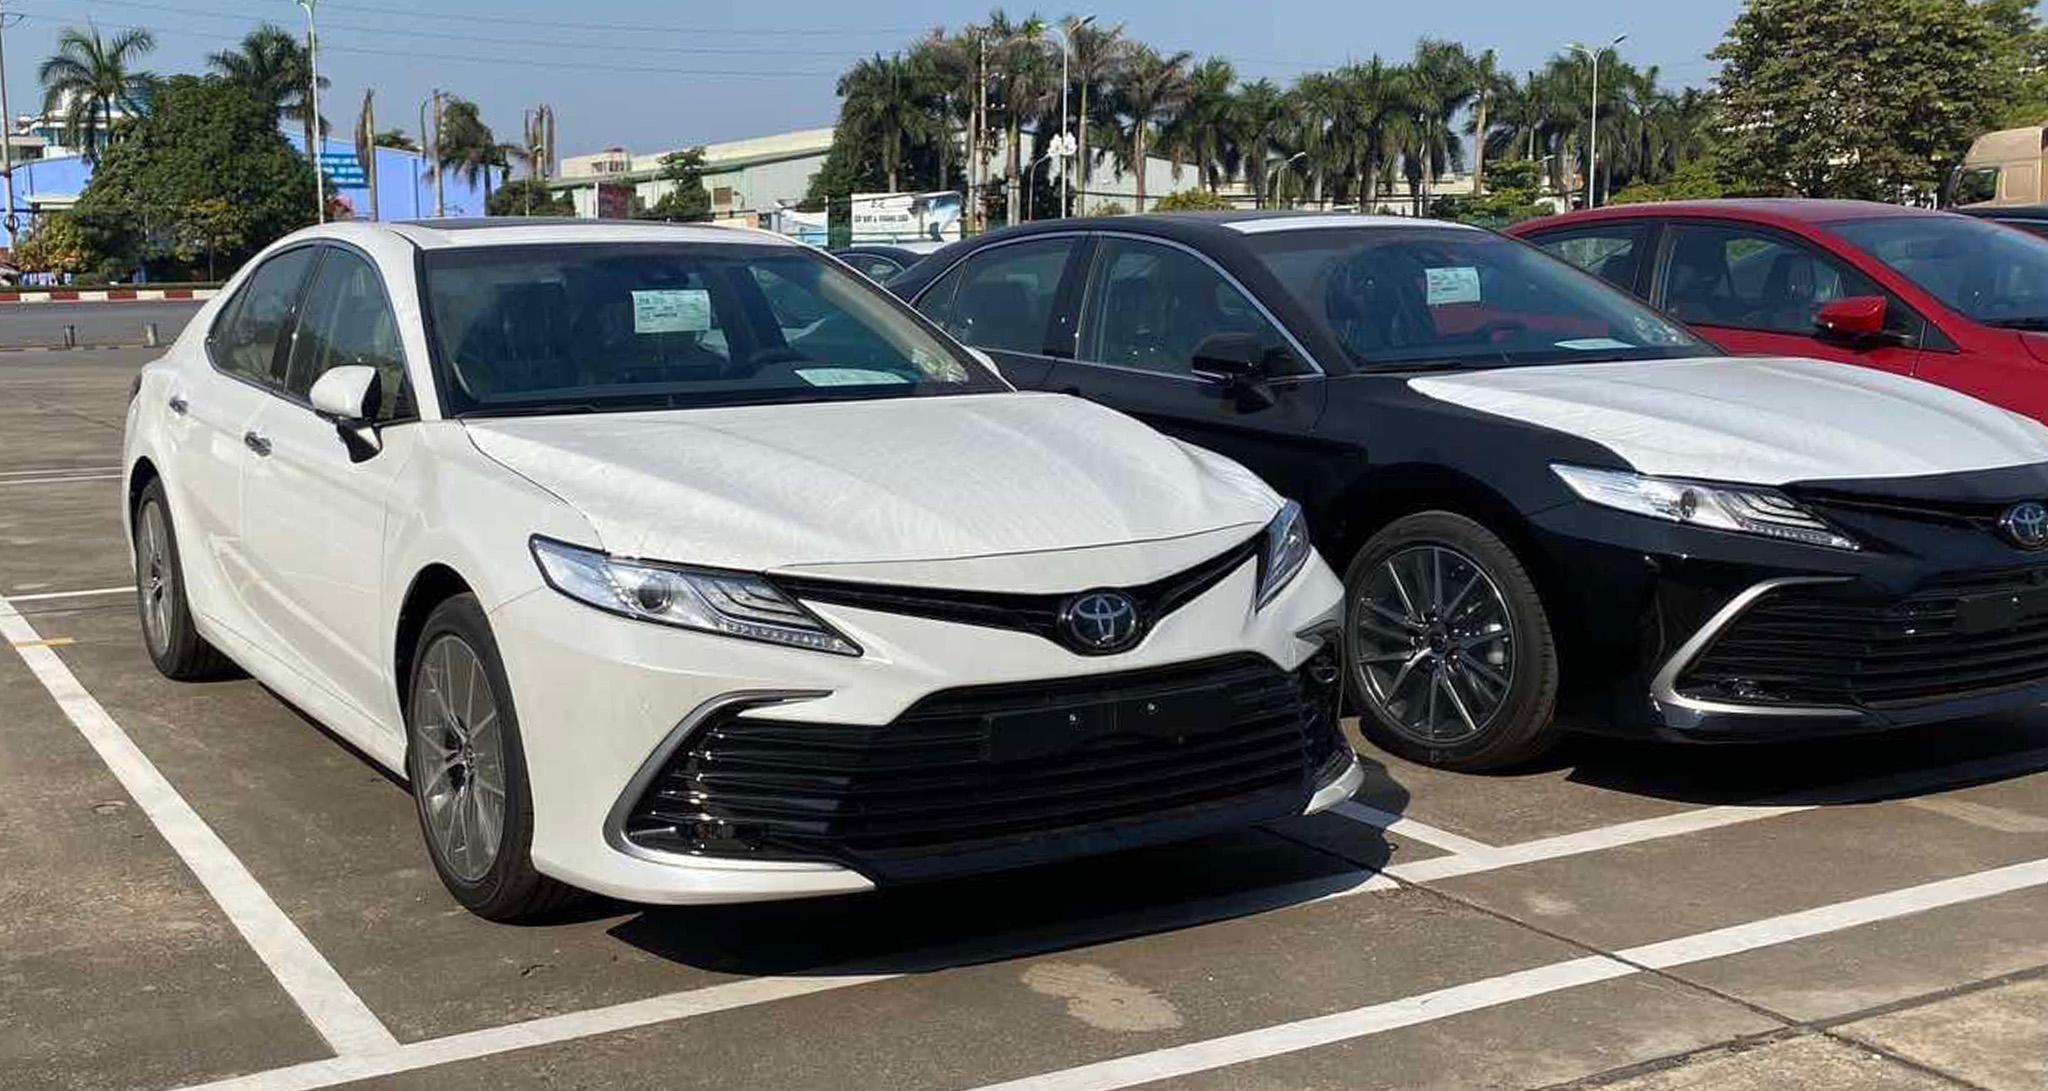 Price of 2020 Toyota Camry Trims Review In Nigeria